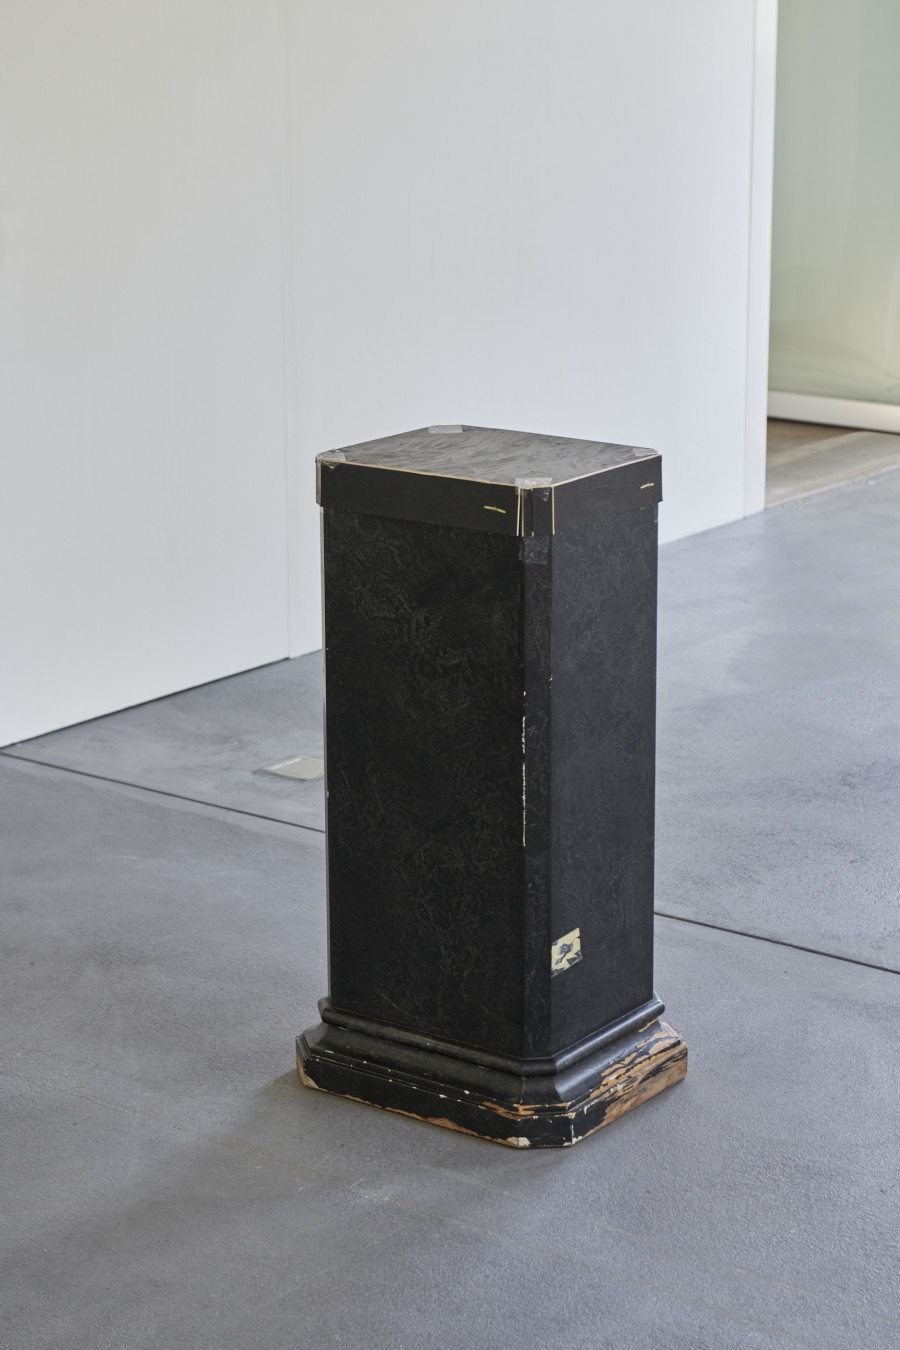 Brad Kronz, Pedestal, 2013. Photo : Guillaume Python. Courtesy of the artist and Kunsthalle Friart Fribourg